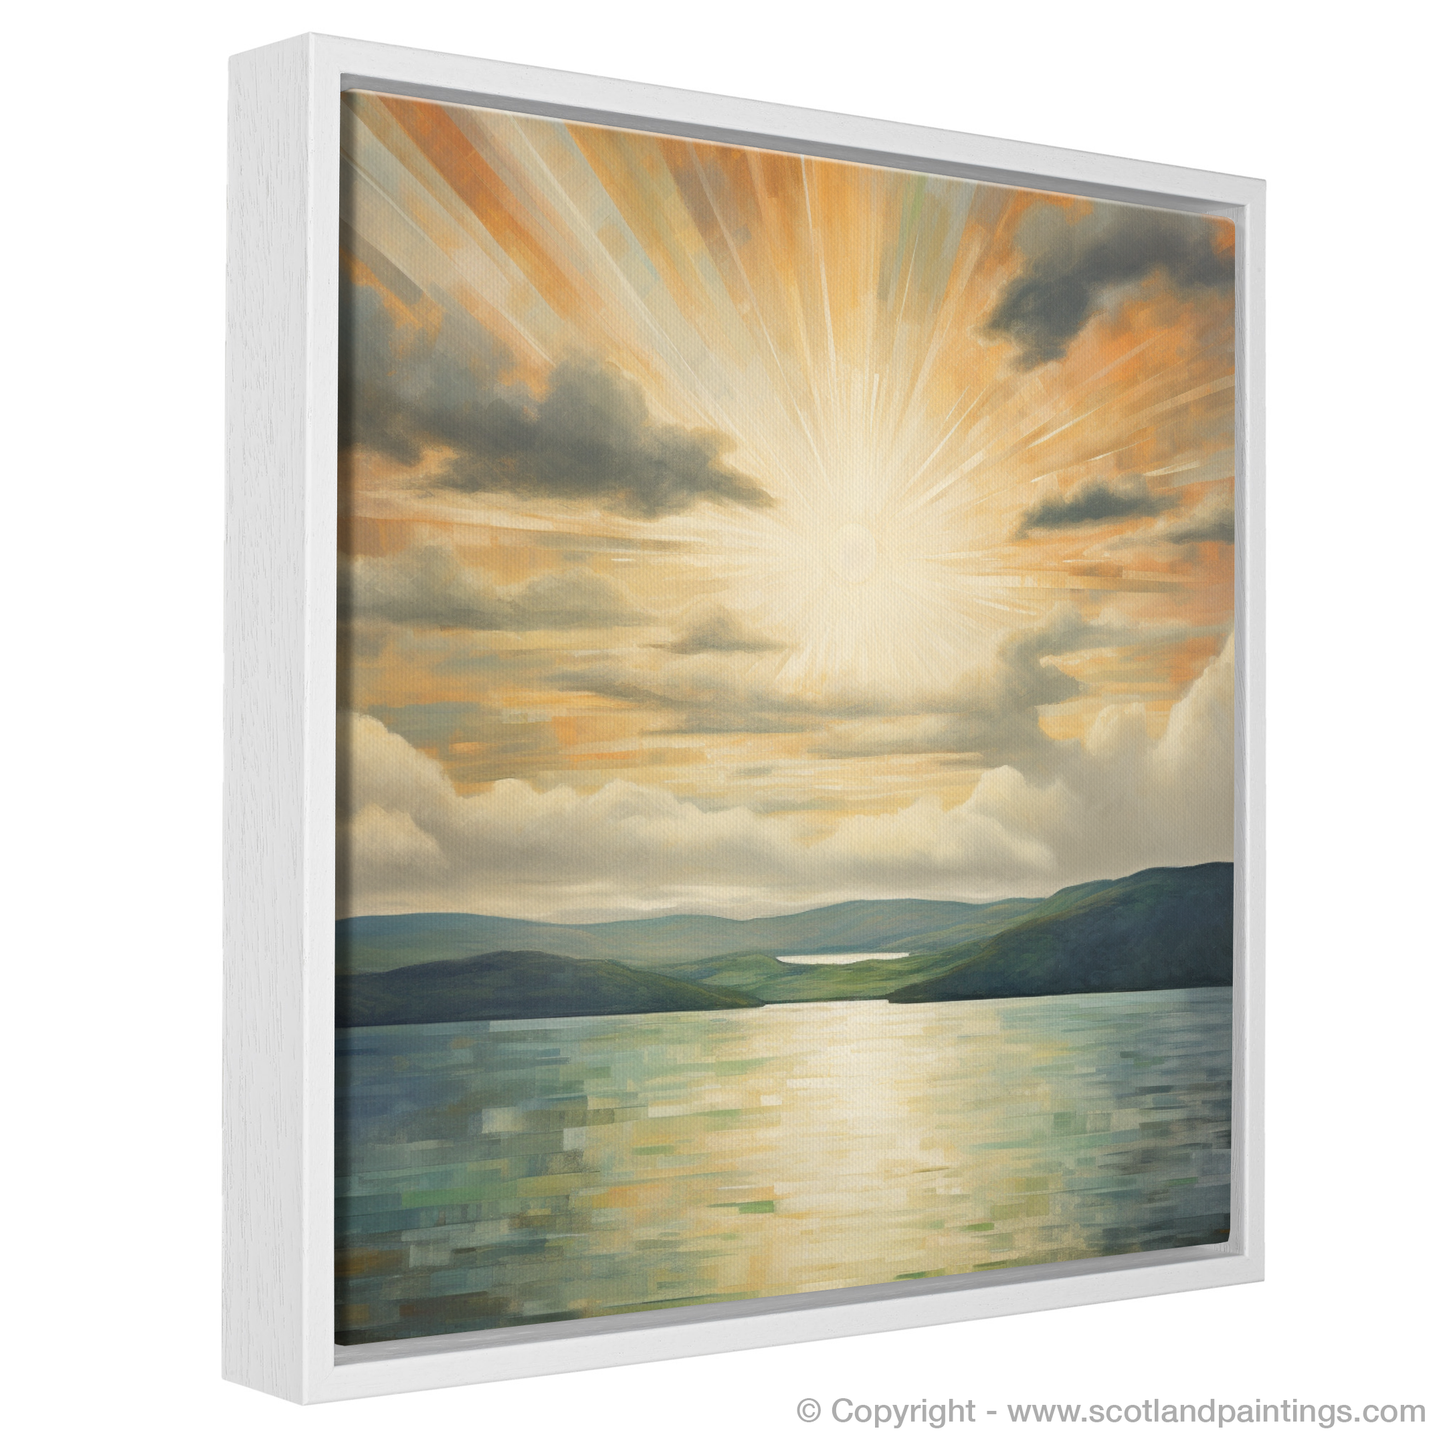 Painting and Art Print of Sun rays through clouds above Loch Lomond entitled "Sun Rays Serenade Over Loch Lomond".